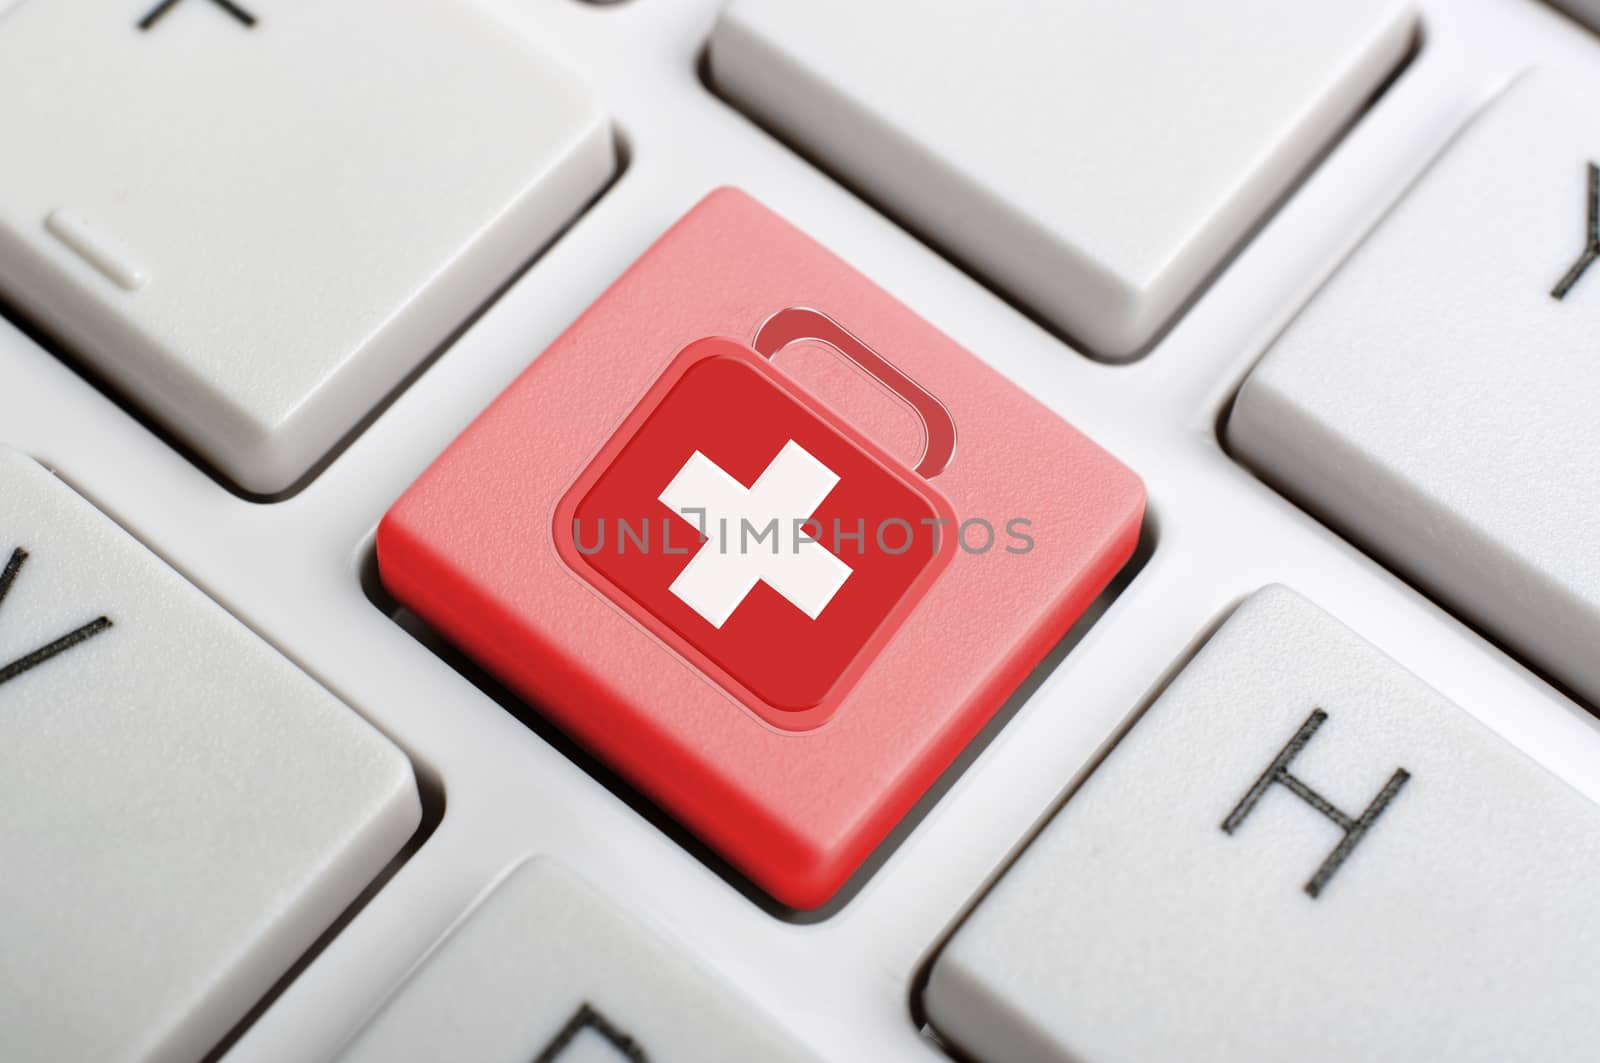 Coquitlam BC Canada - June 12, 2014 : Macro red first aid symbol key on white keyboard.  Abstract emergency concept on keyboard.